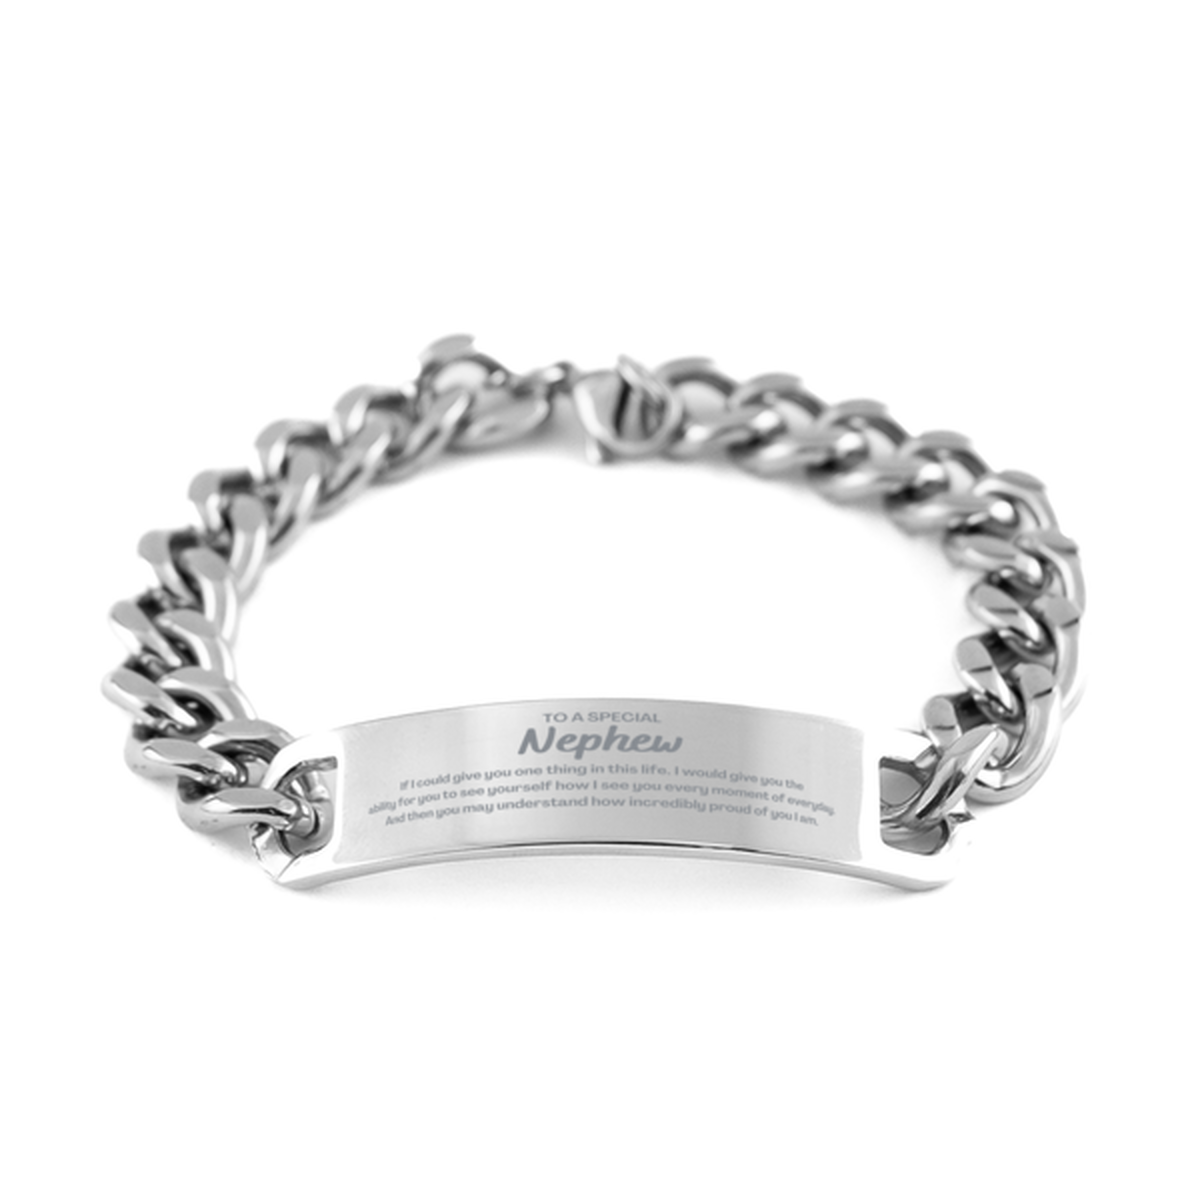 To My Nephew Cuban Chain Stainless Steel Bracelet, Gifts For Nephew Engraved, Inspirational Gifts for Christmas Birthday, Epic Gifts for Nephew To A Special Nephew how incredibly proud of you I am